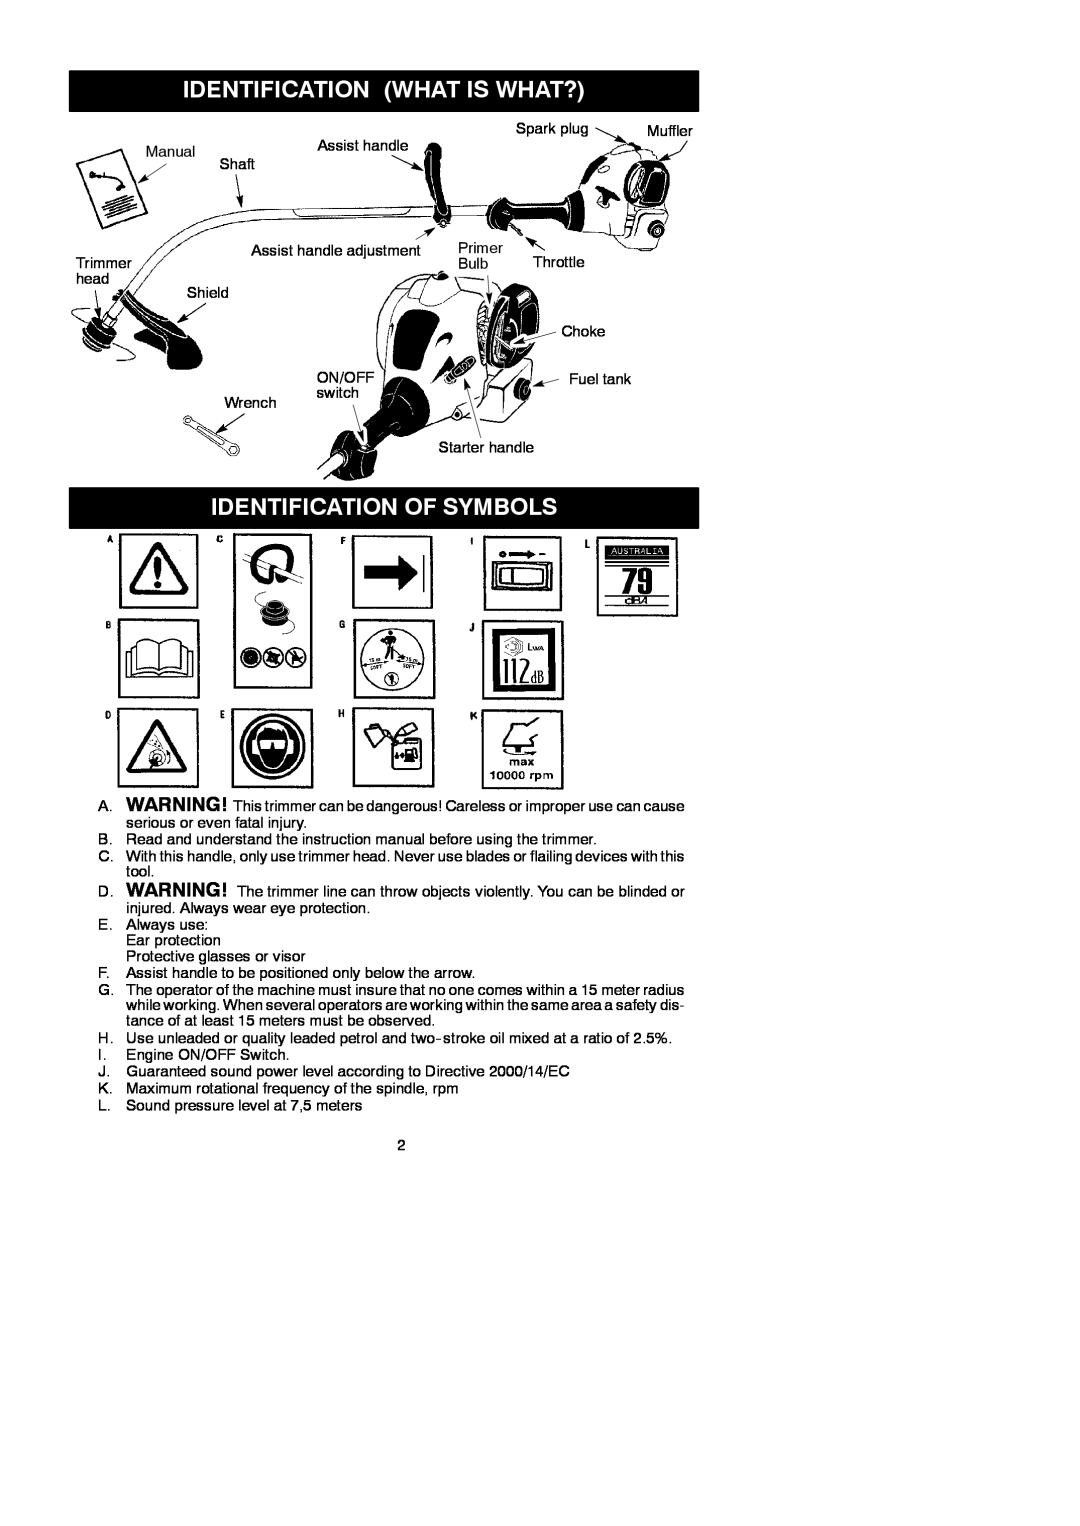 McCulloch 545097742 instruction manual Identification What Is What?, Identification Of Symbols 